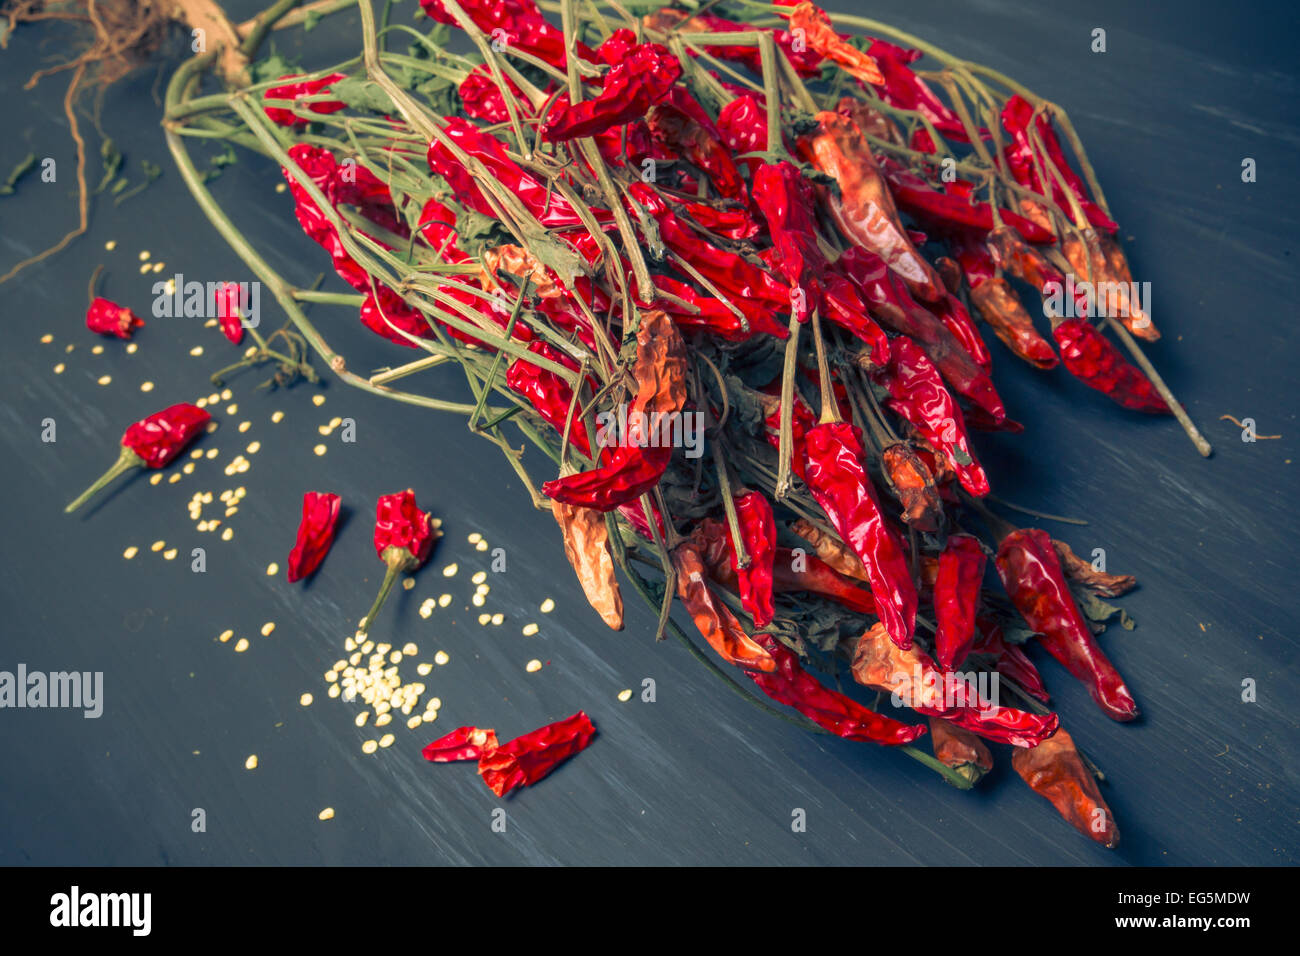 Bunch of hot red chili peppers and seeds on wood background Stock Photo